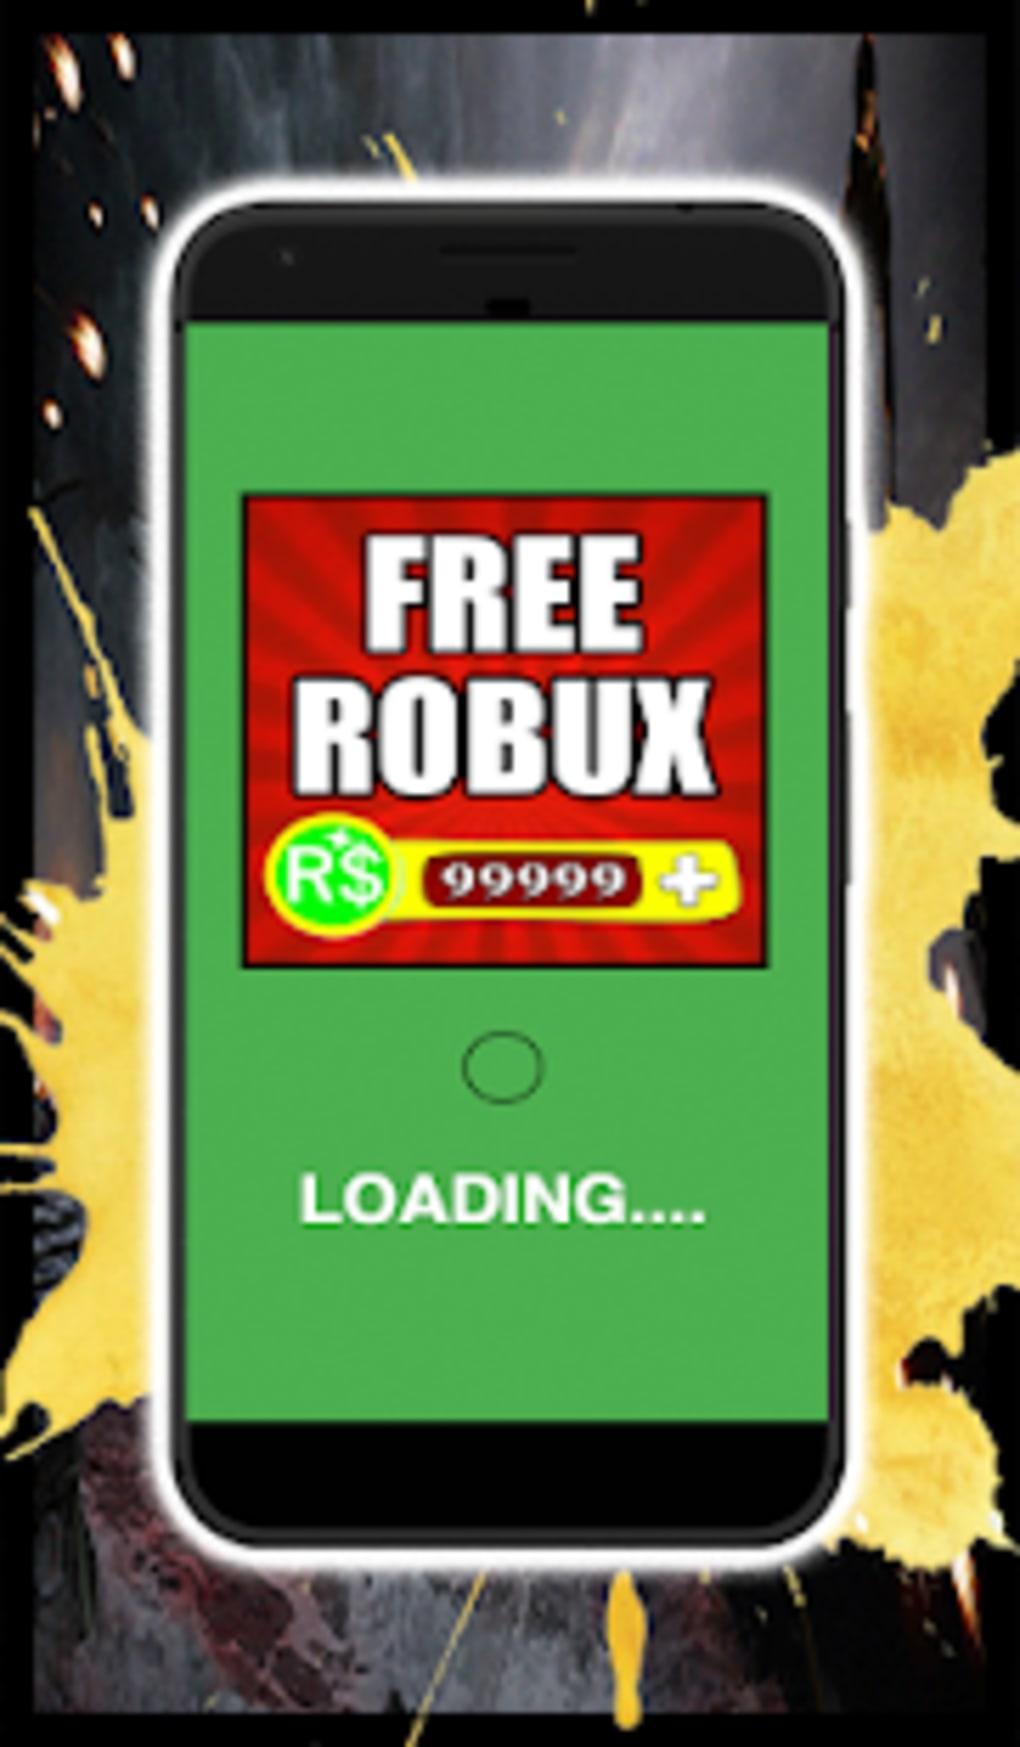 Get Free Robux Pro Tips Guide Robux Free 2k19 For Android - the ultimate roblox book pdf free robux codes that havent